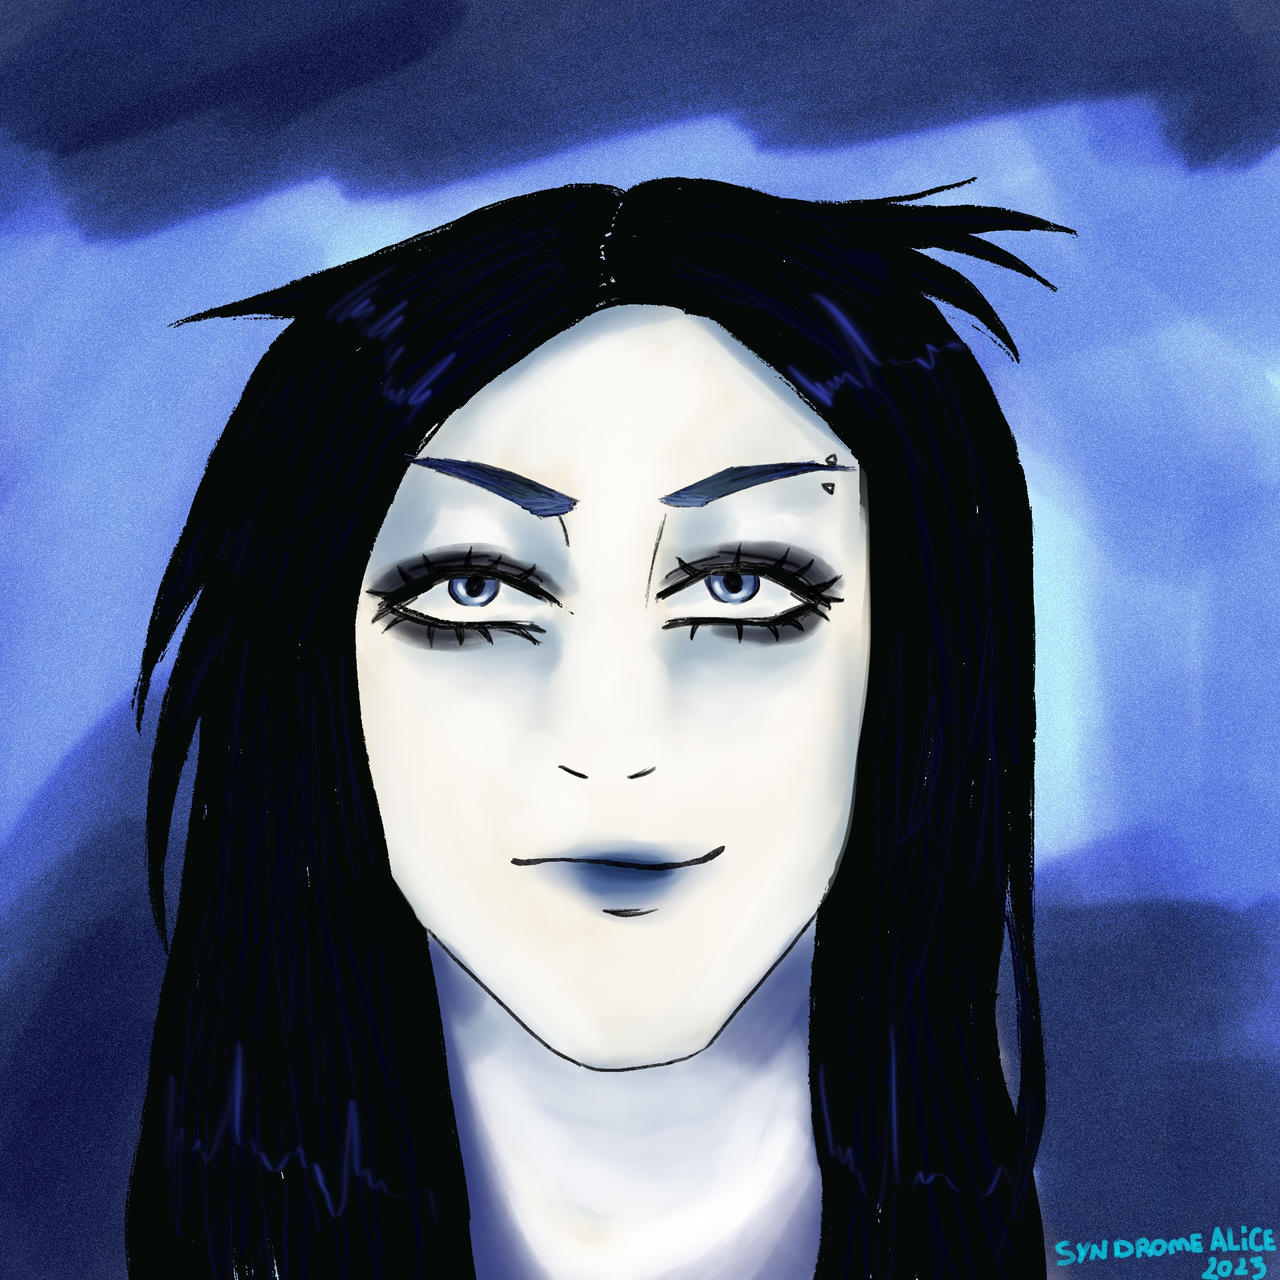 Re-L Mayer from Ergo Proxy looks like Amy Lee from Evanescence